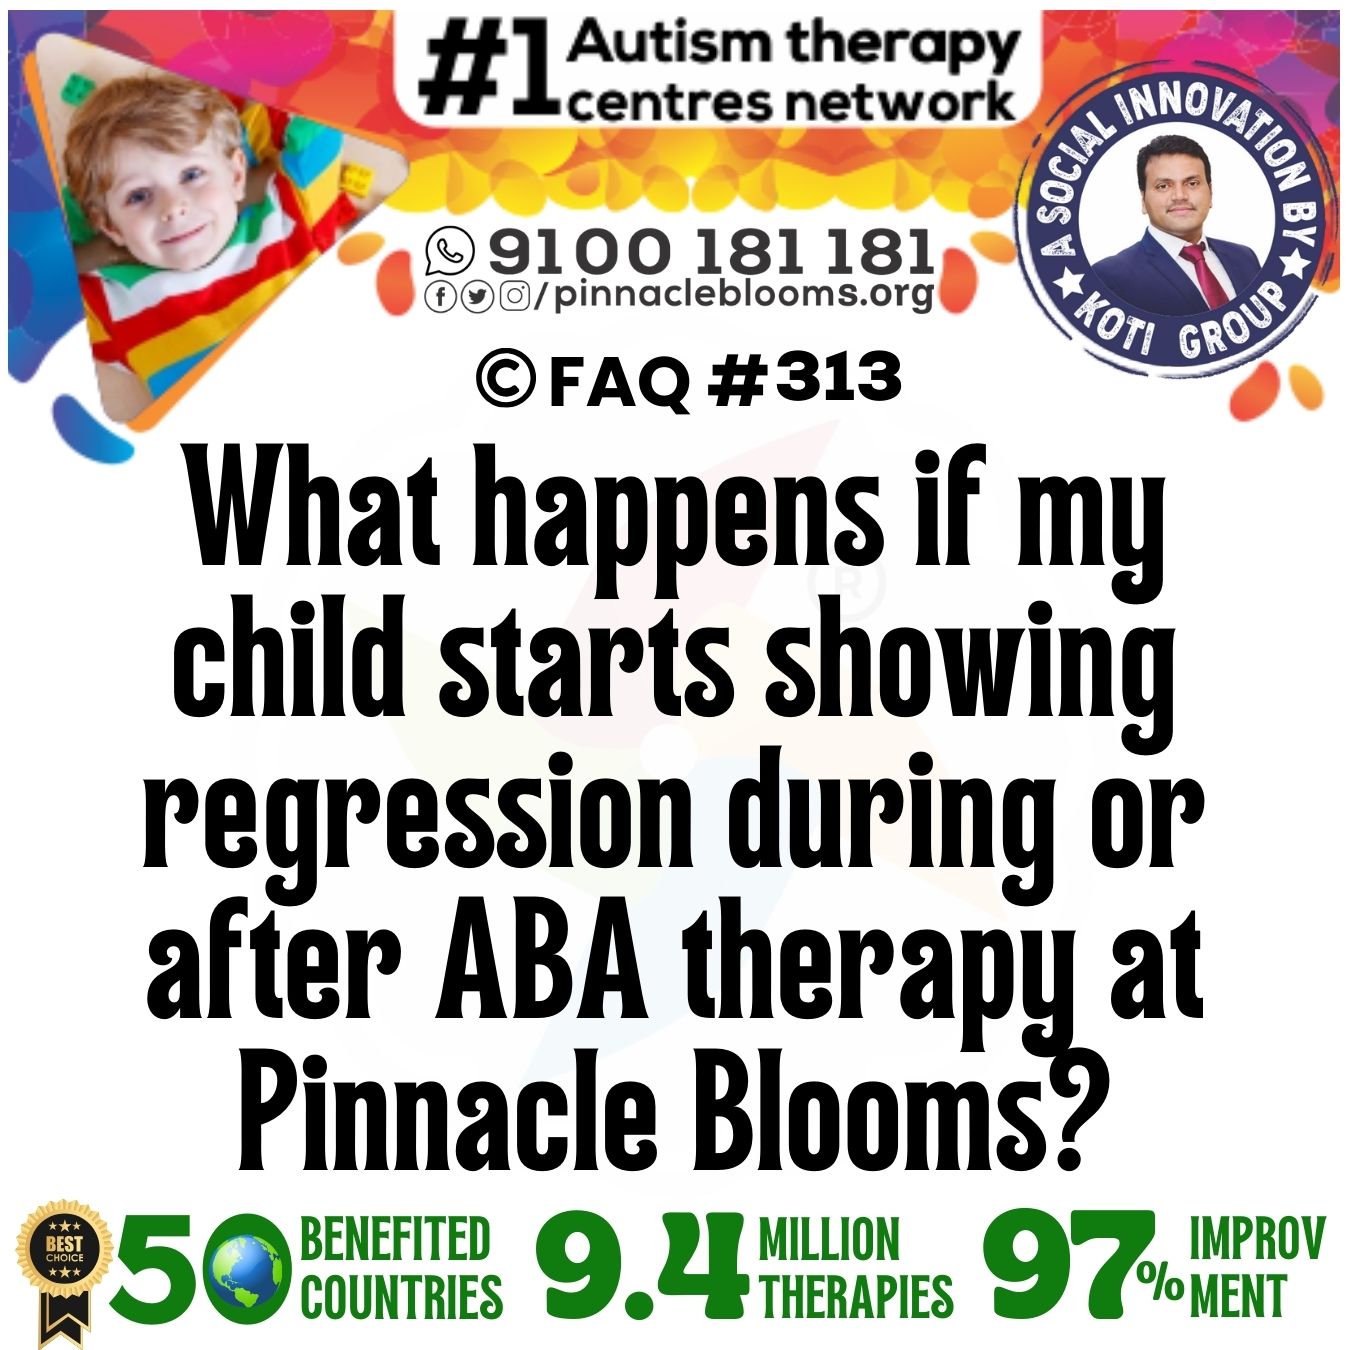 What happens if my child starts showing regression during or after ABA therapy at Pinnacle Blooms?